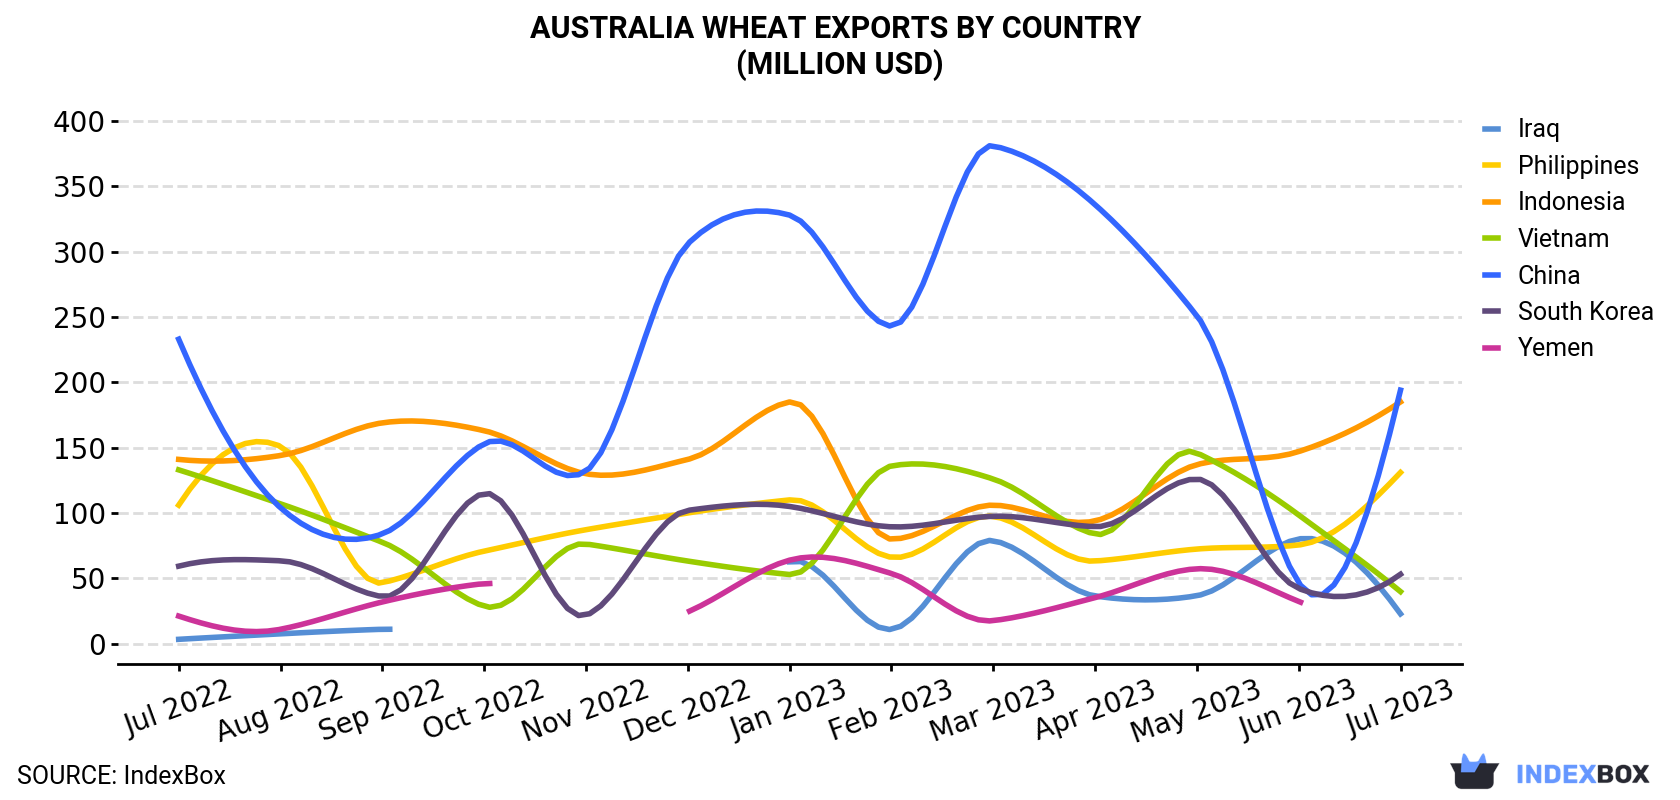 Australia Wheat Exports By Country (Million USD)